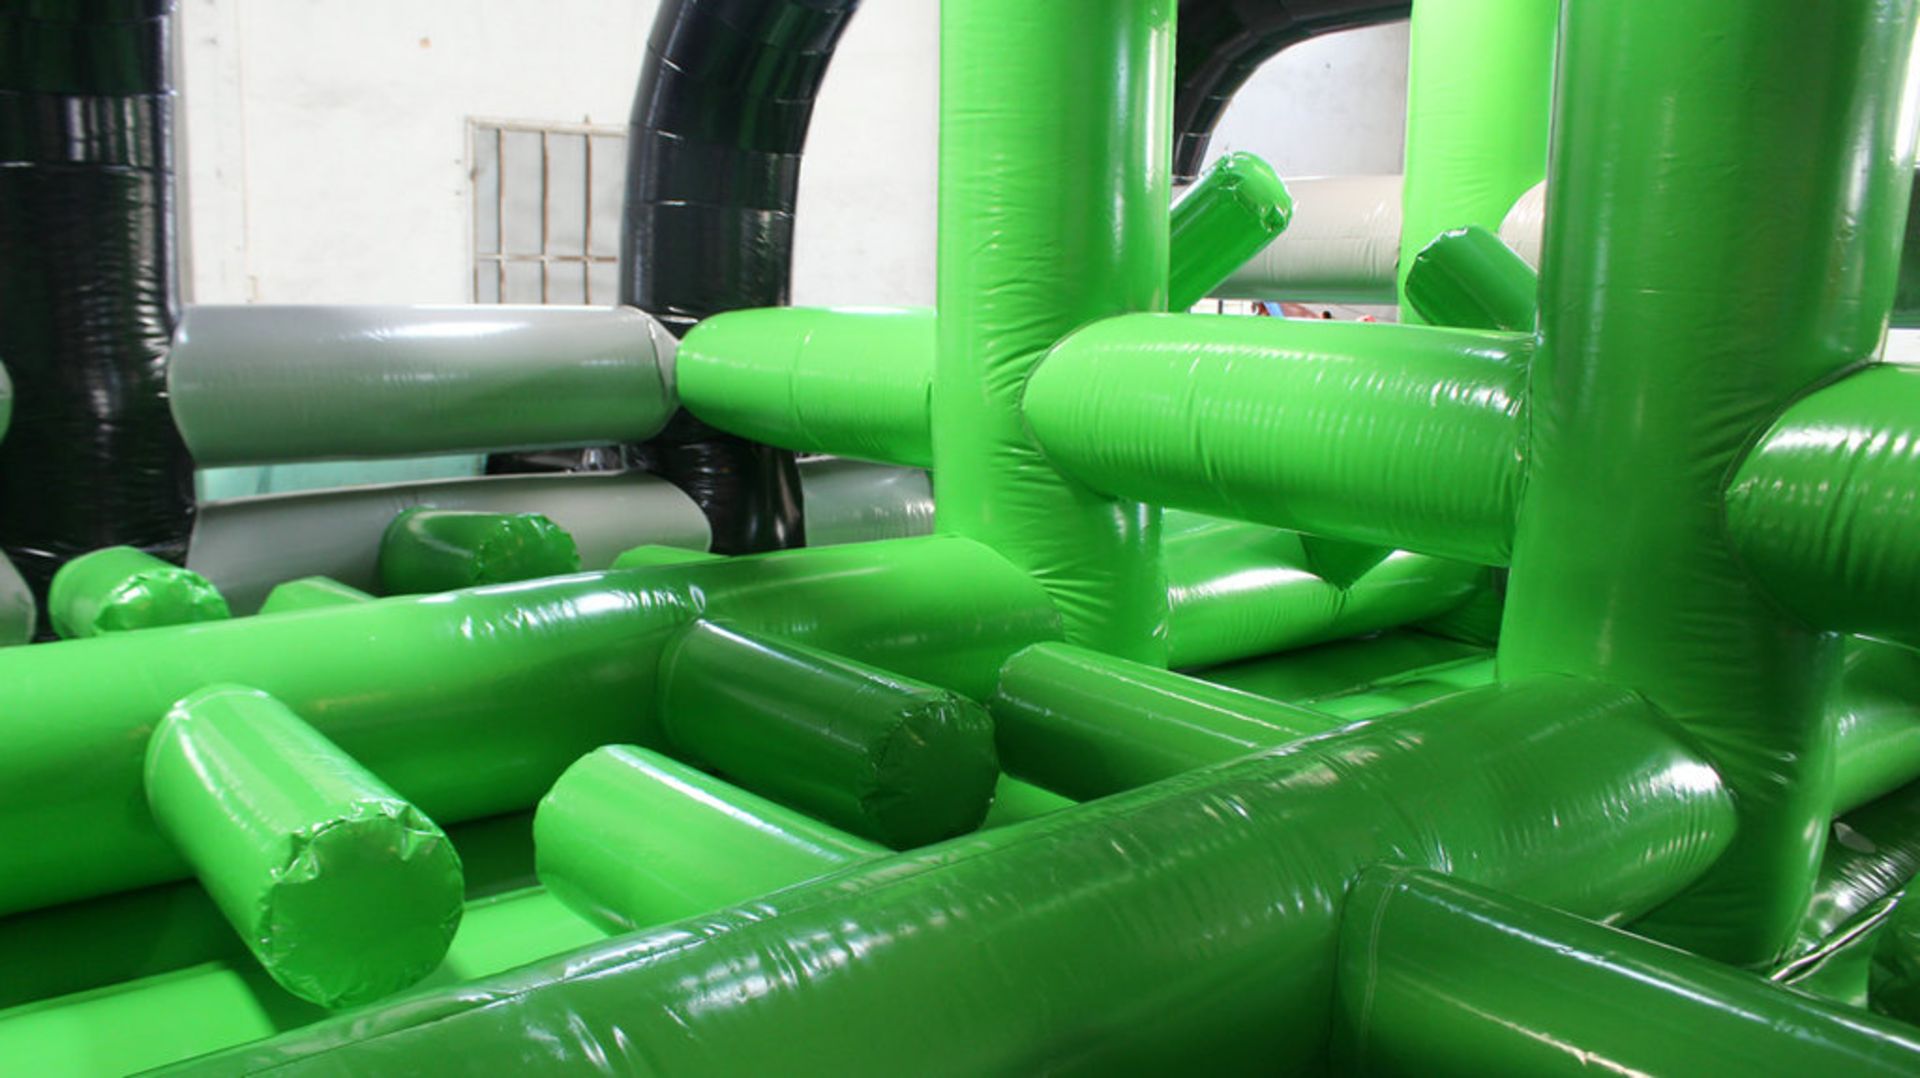 Kapow Inflatable Obstacle course, comprising 12 as - Image 26 of 46